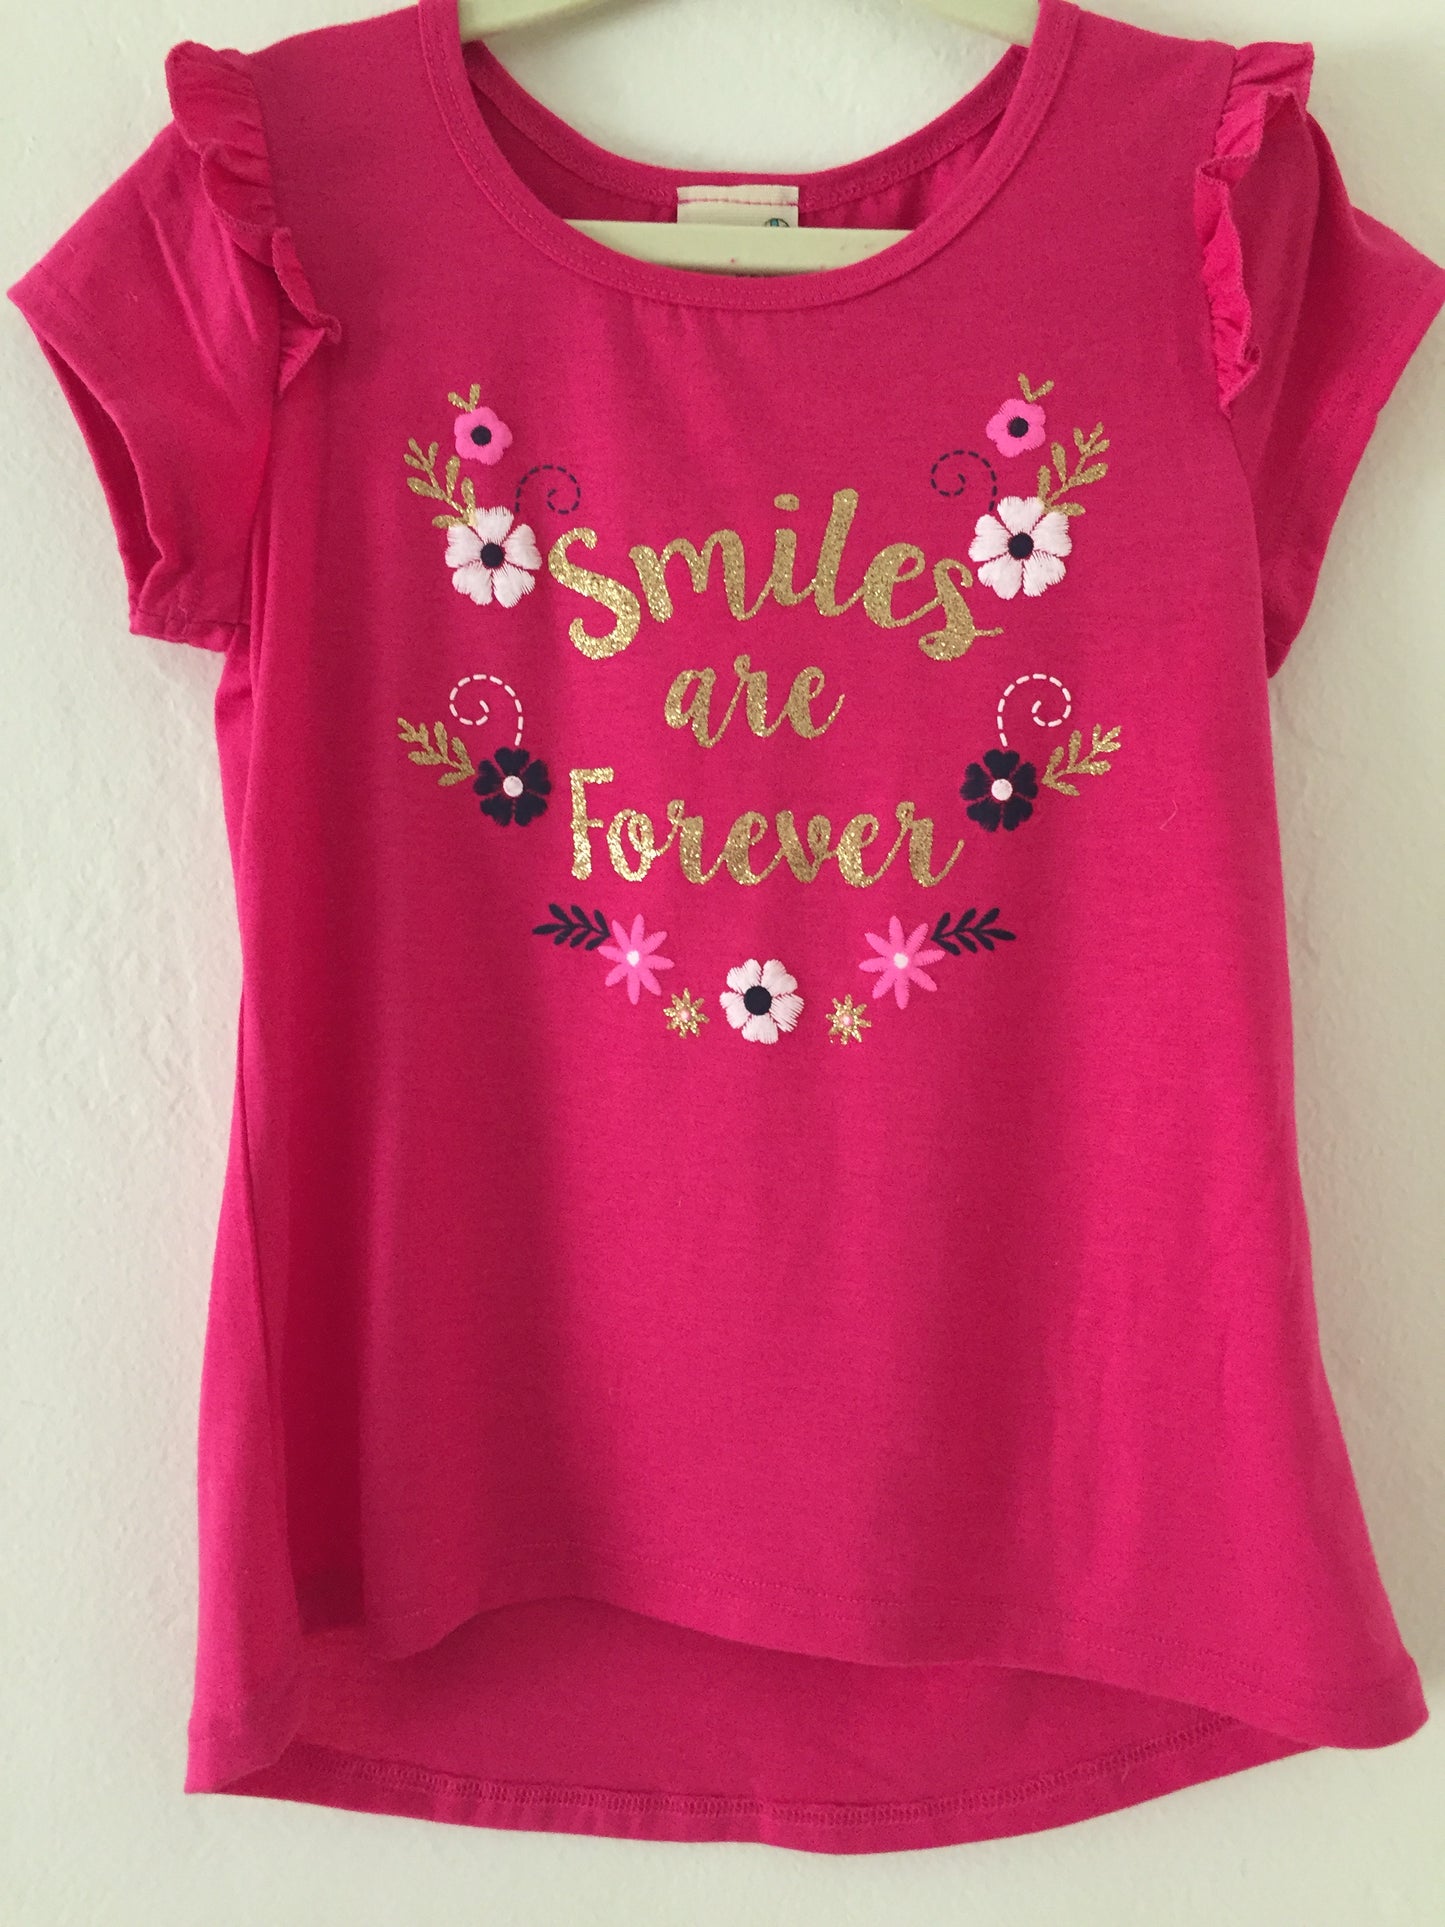 Girls "Smiles are Forever" Graphic Tee Shirt